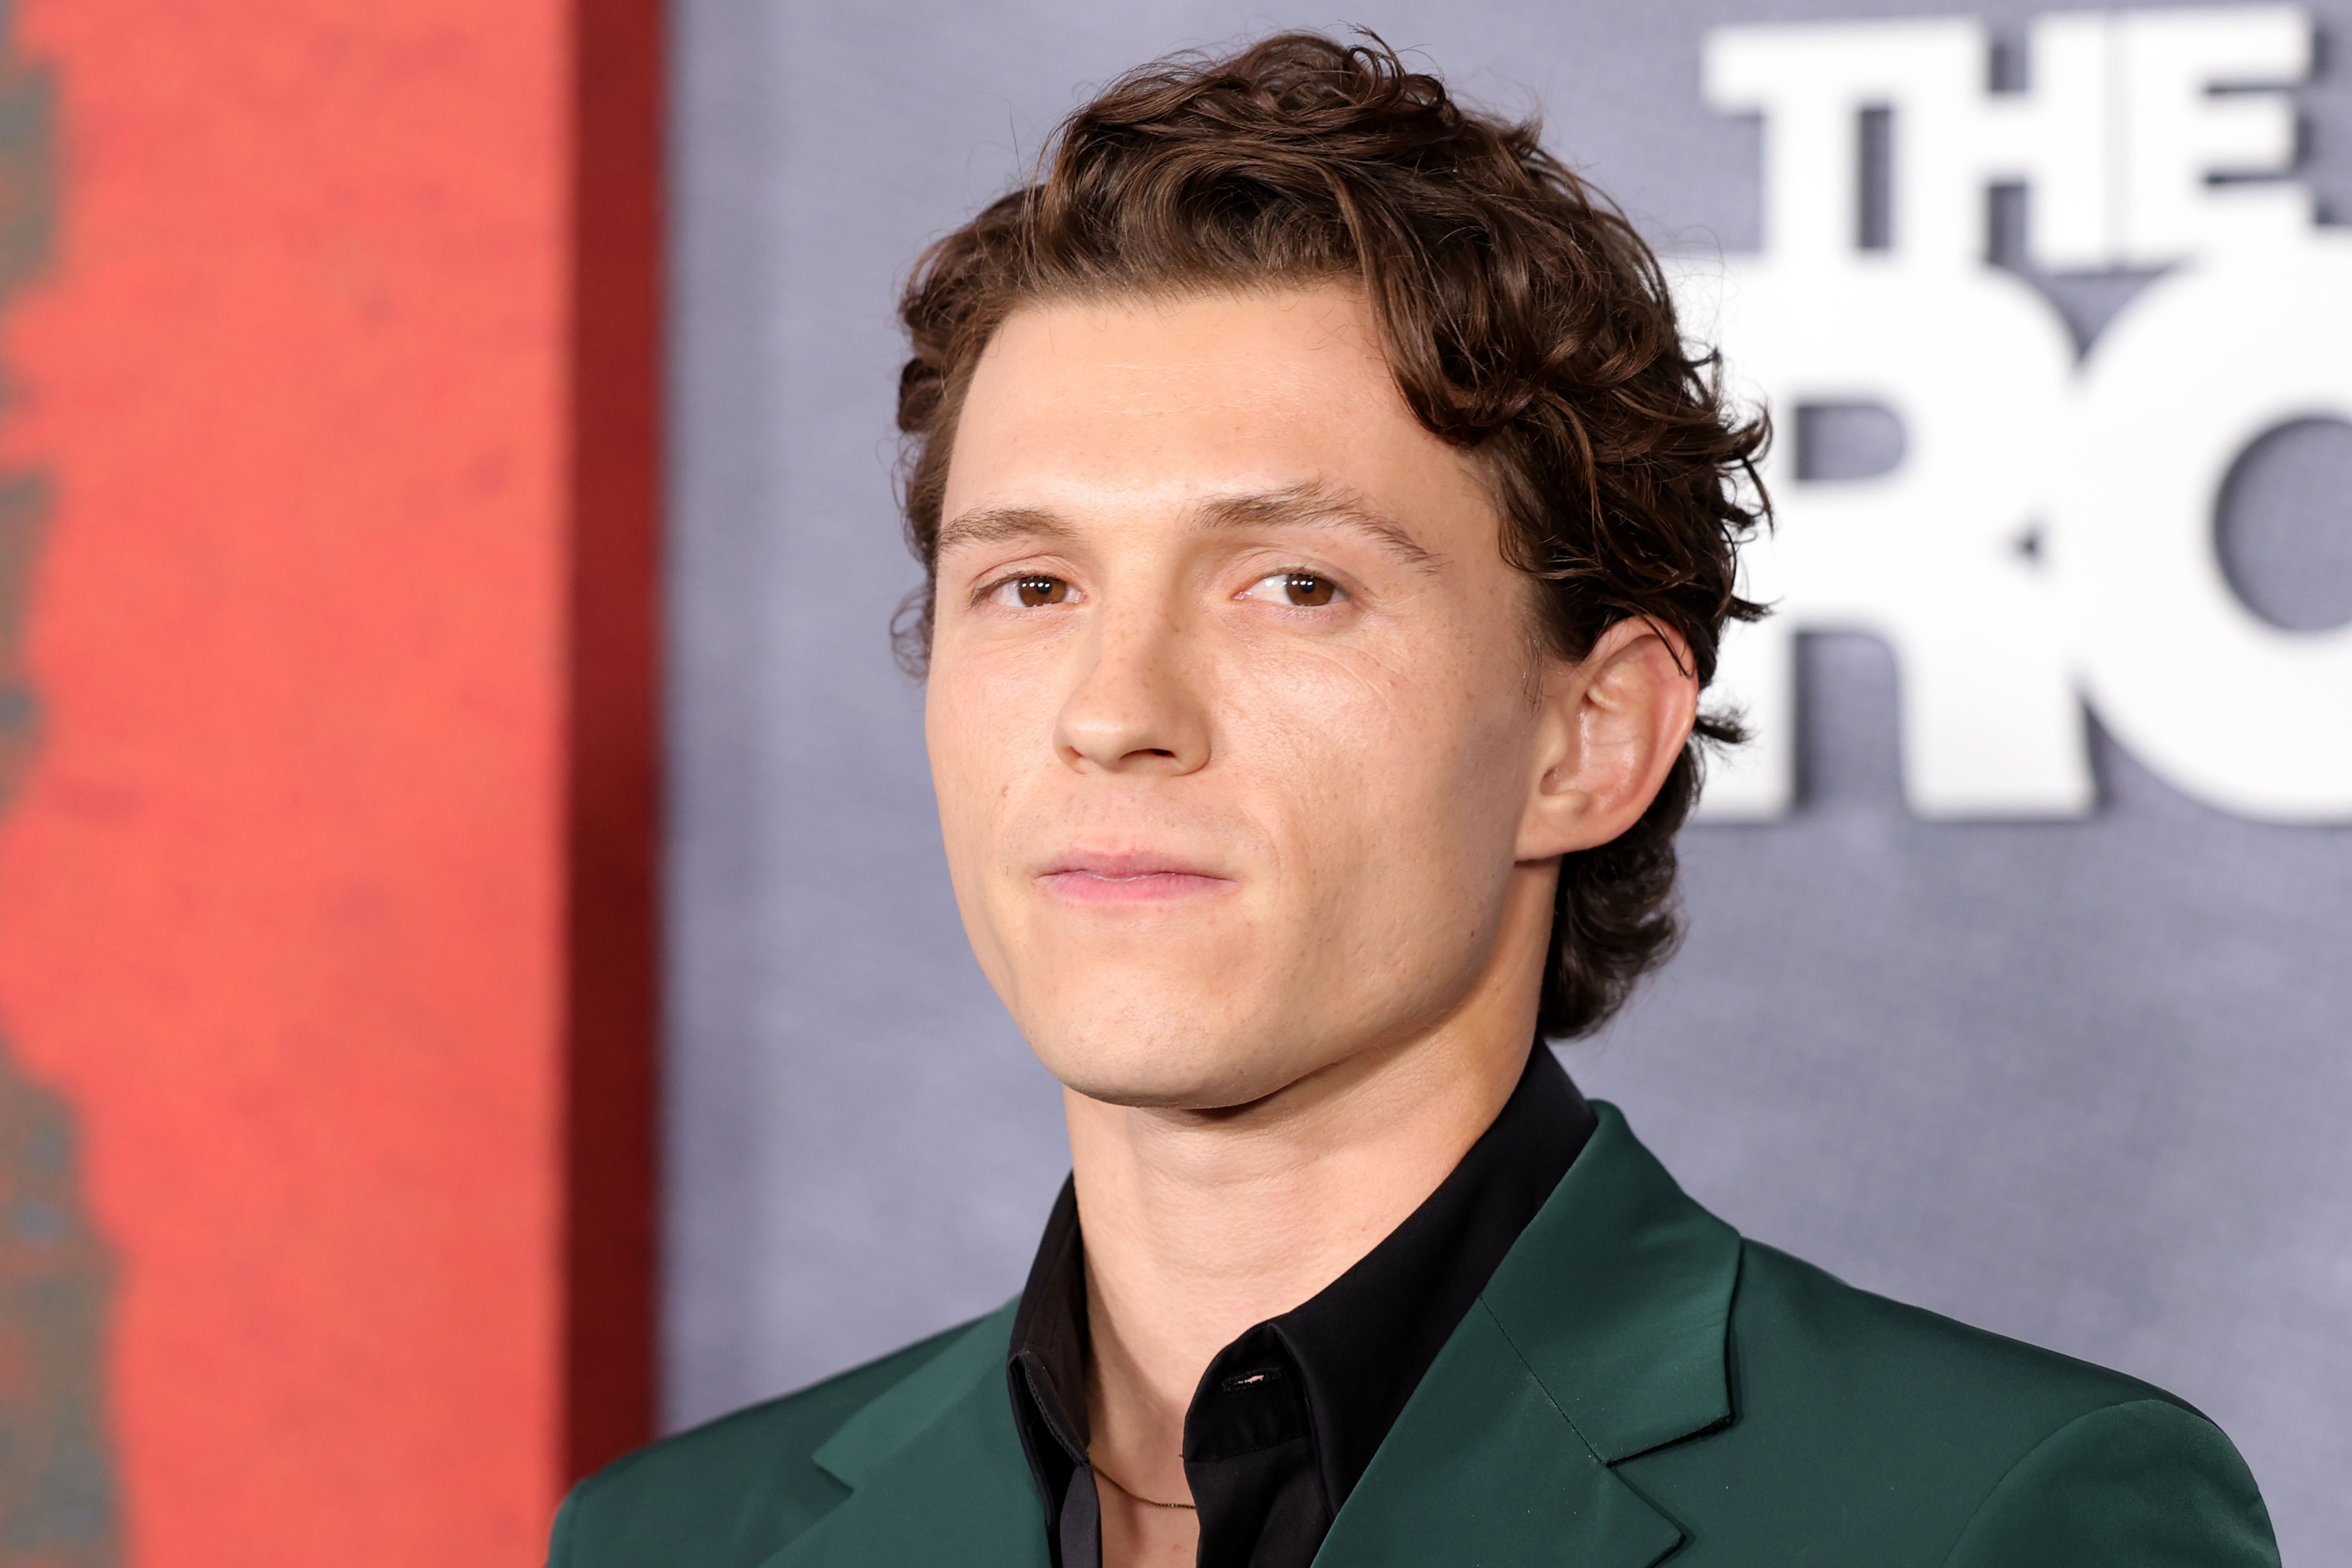 tom holland starring in london west end revival of ‘romeo and juliet'